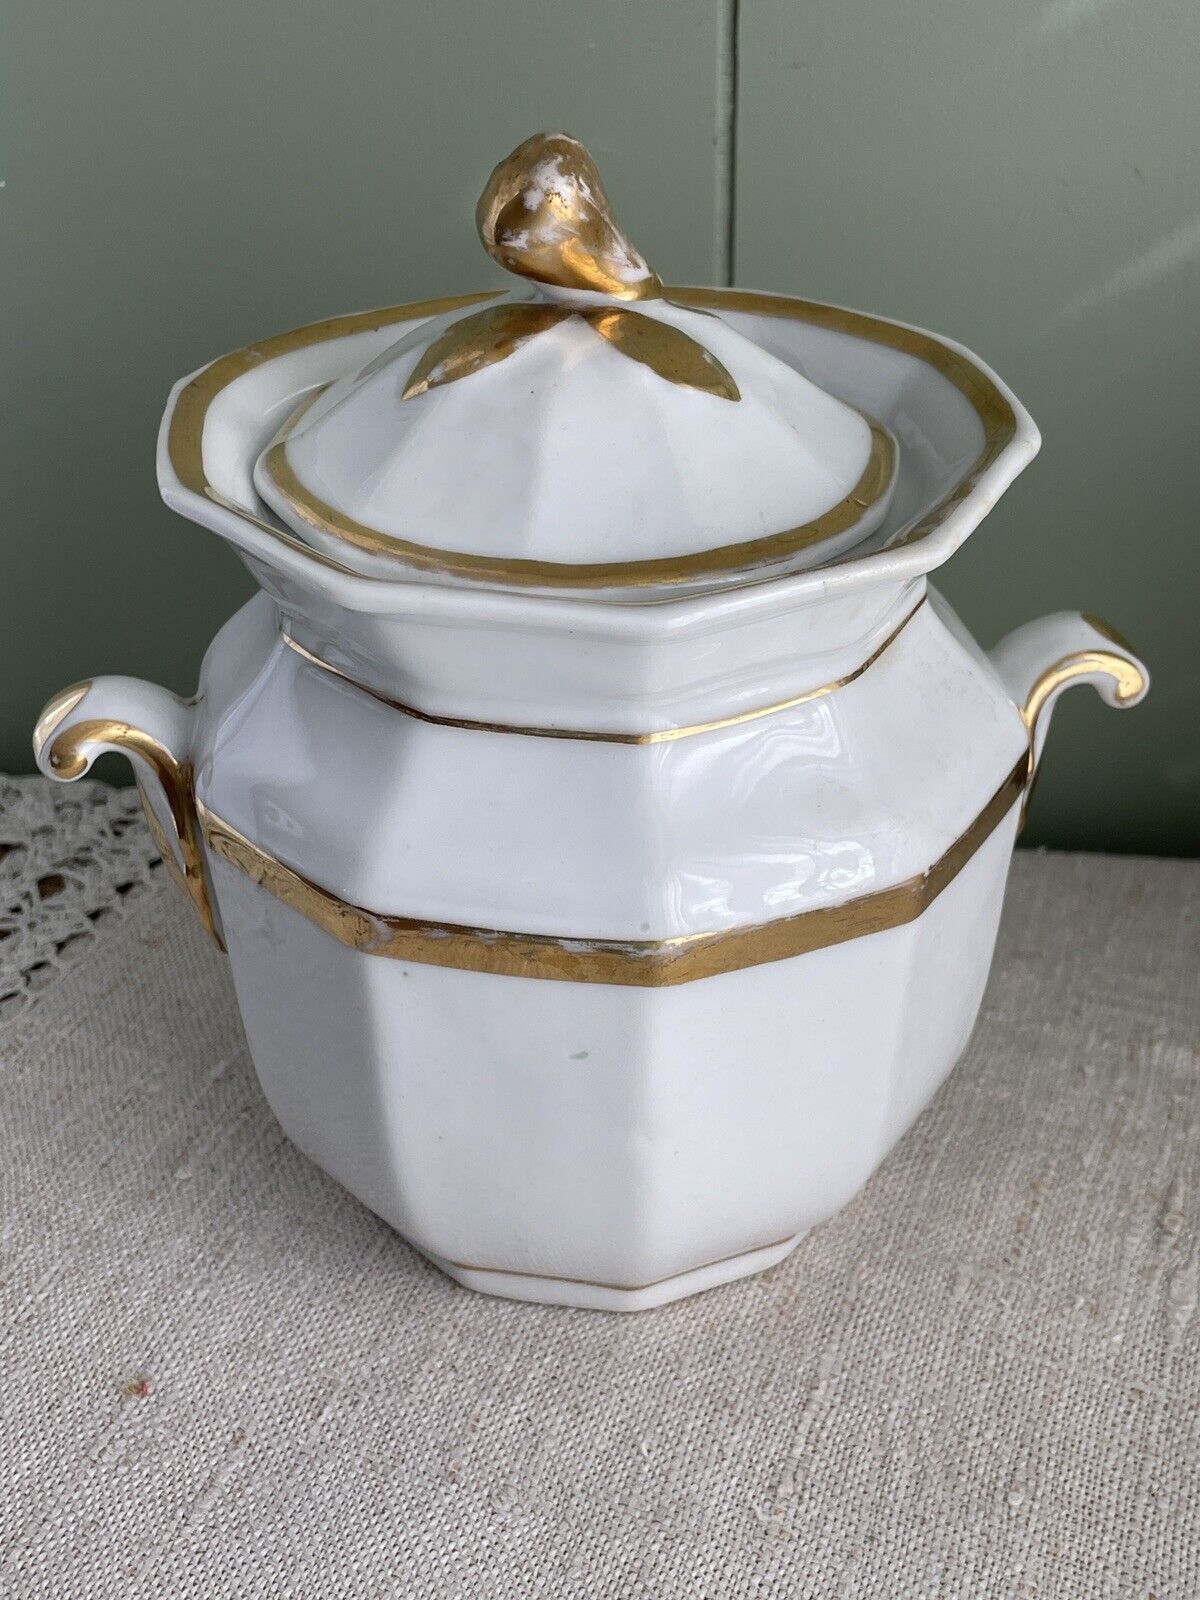 Antique Large Sugar Bowl w/Lid Double Handle Gold Trim Pear Finial 6 3/4” Tall